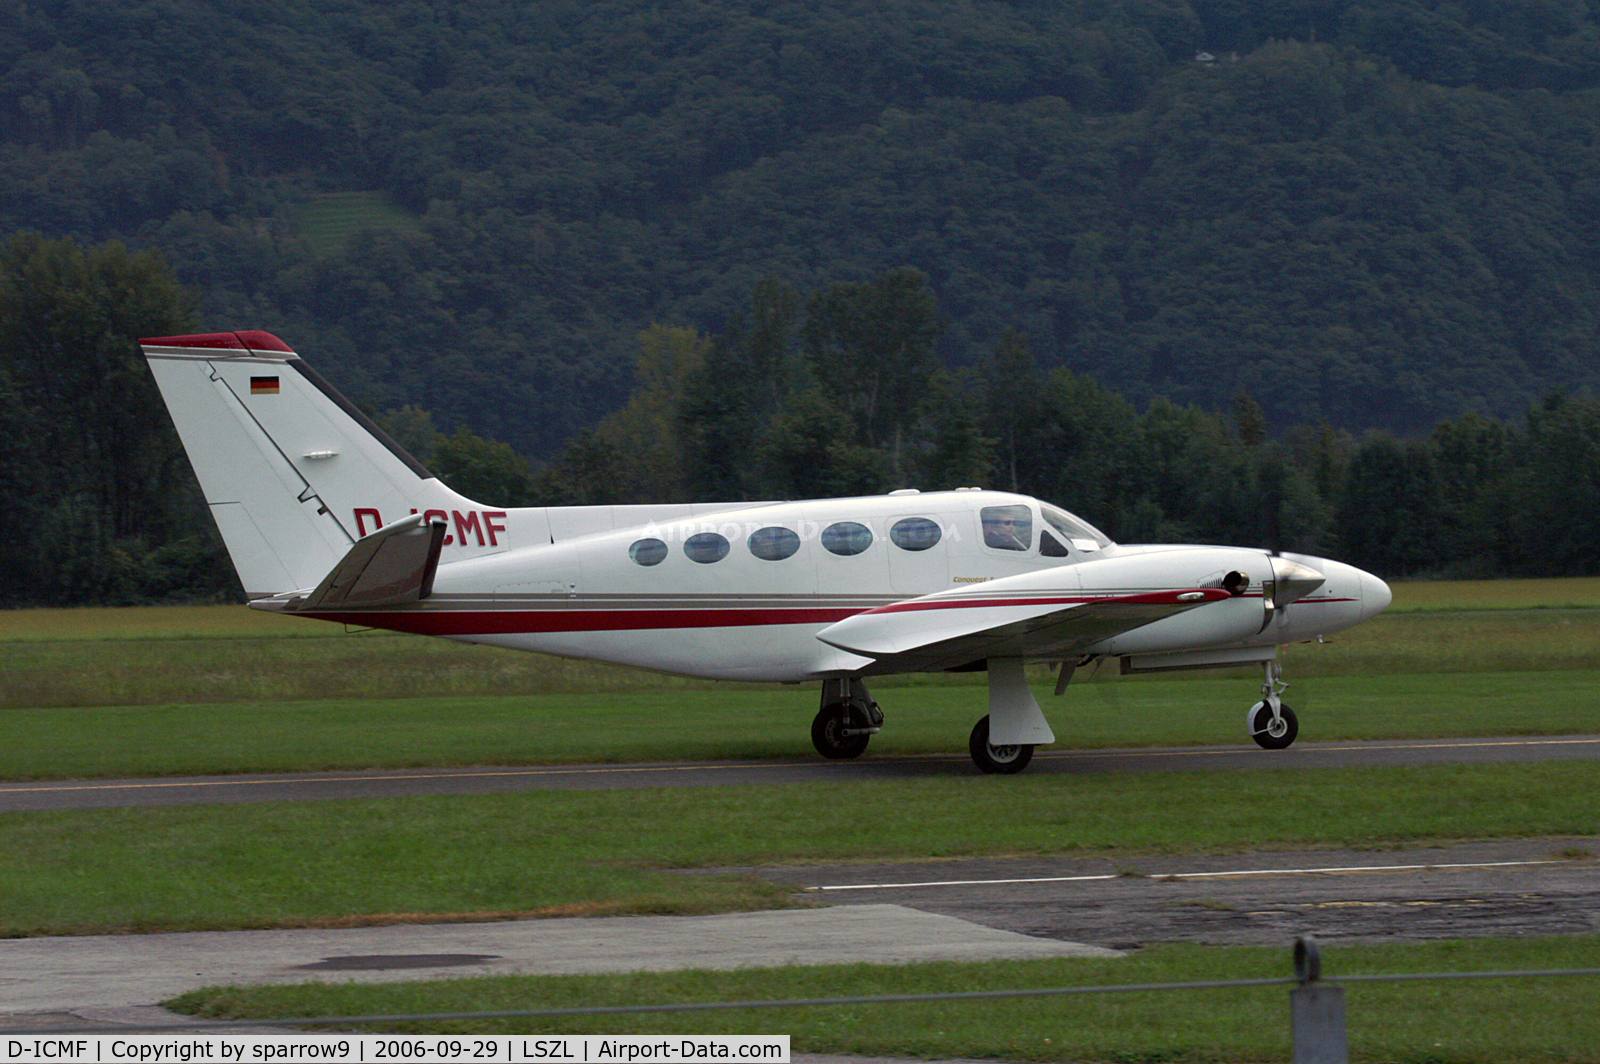 D-ICMF, 1989 Cessna 425 Conquest I C/N 425-0102, Taxying for the concrete runway at Locarno